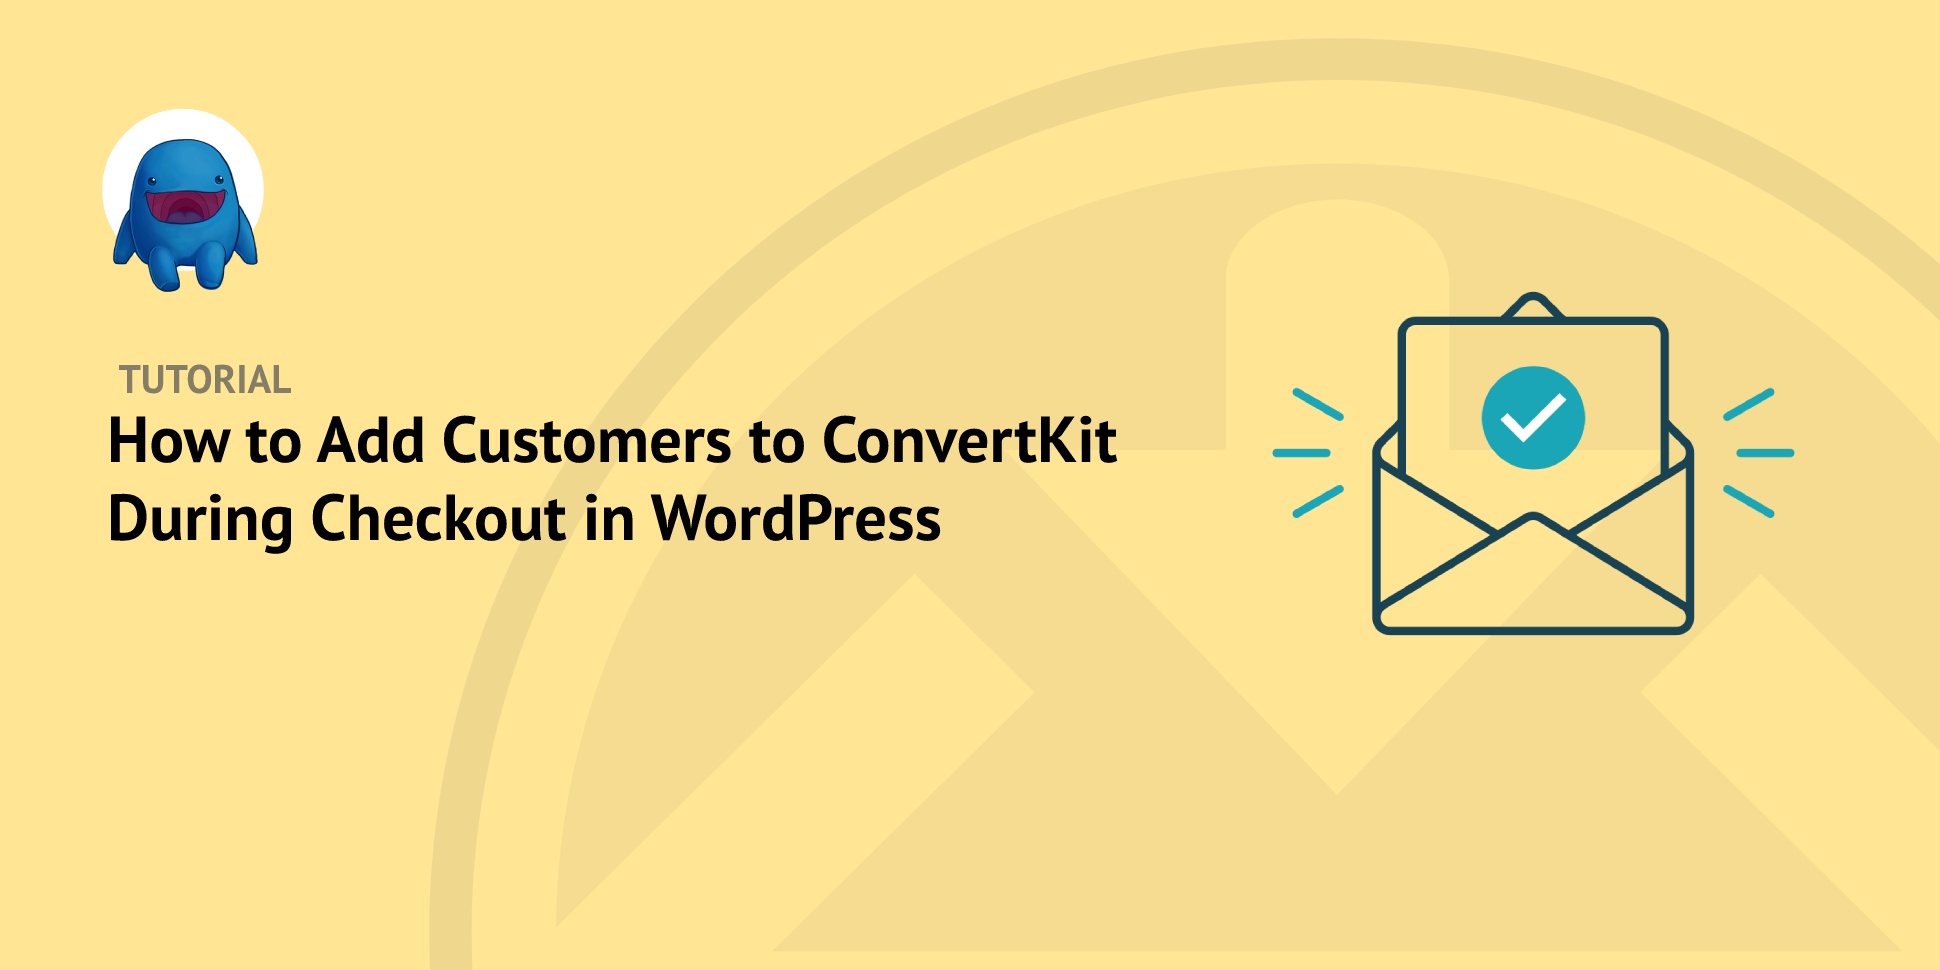 How to Add Customers to ConvertKit During Checkout in WordPress